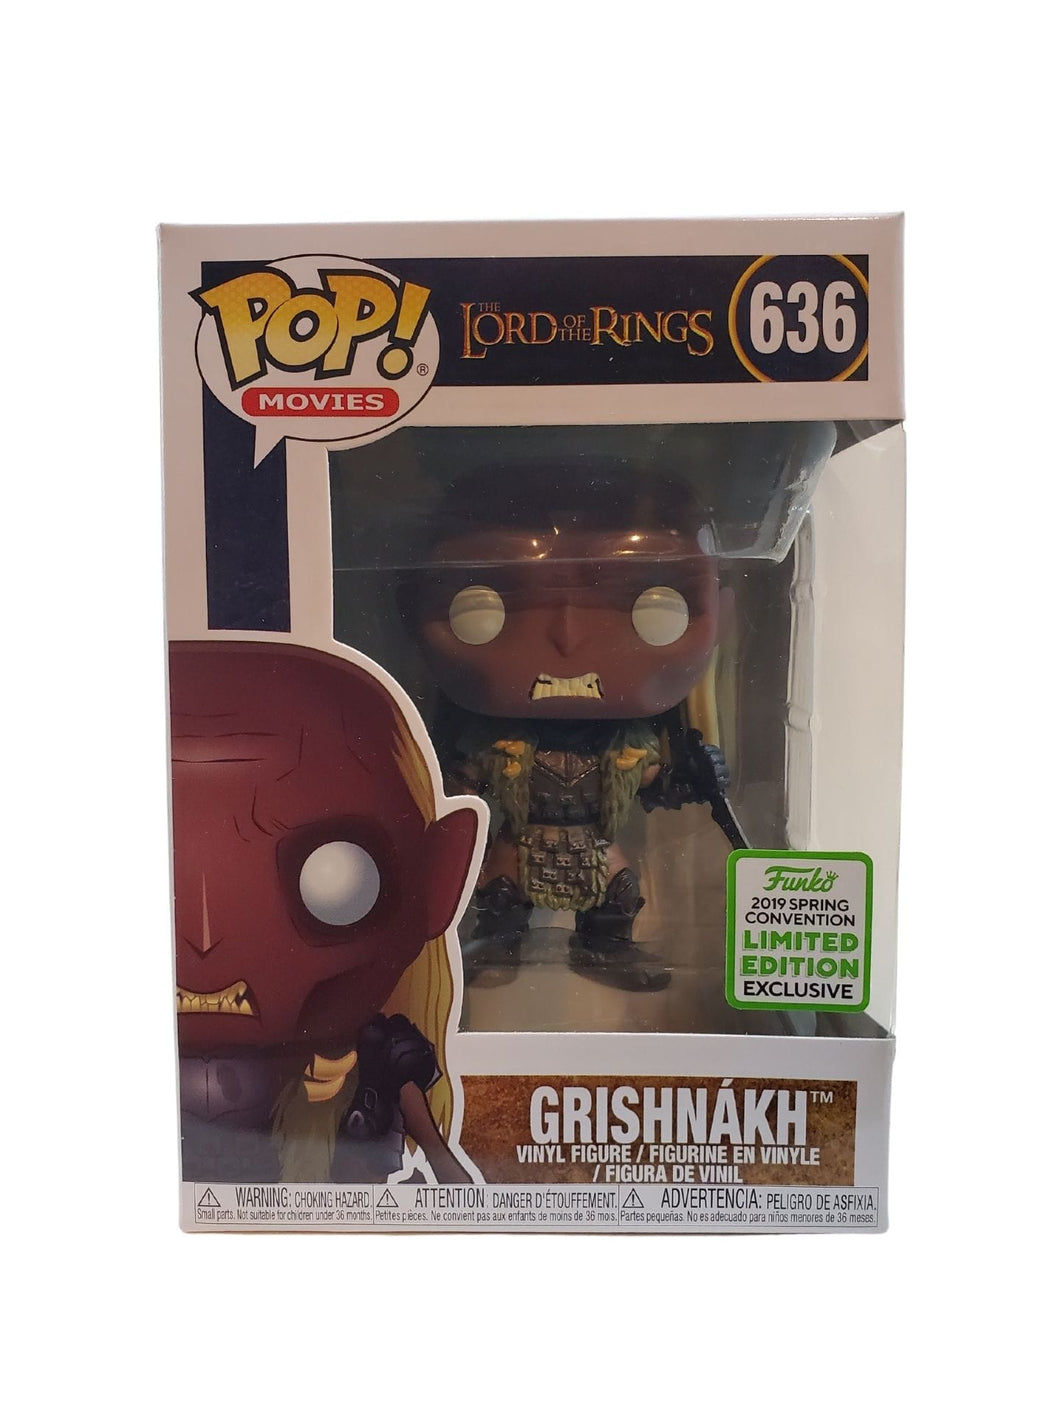 Lord of the Rings Grishnakh 2019 Spring Convention Exclusive Funko POP